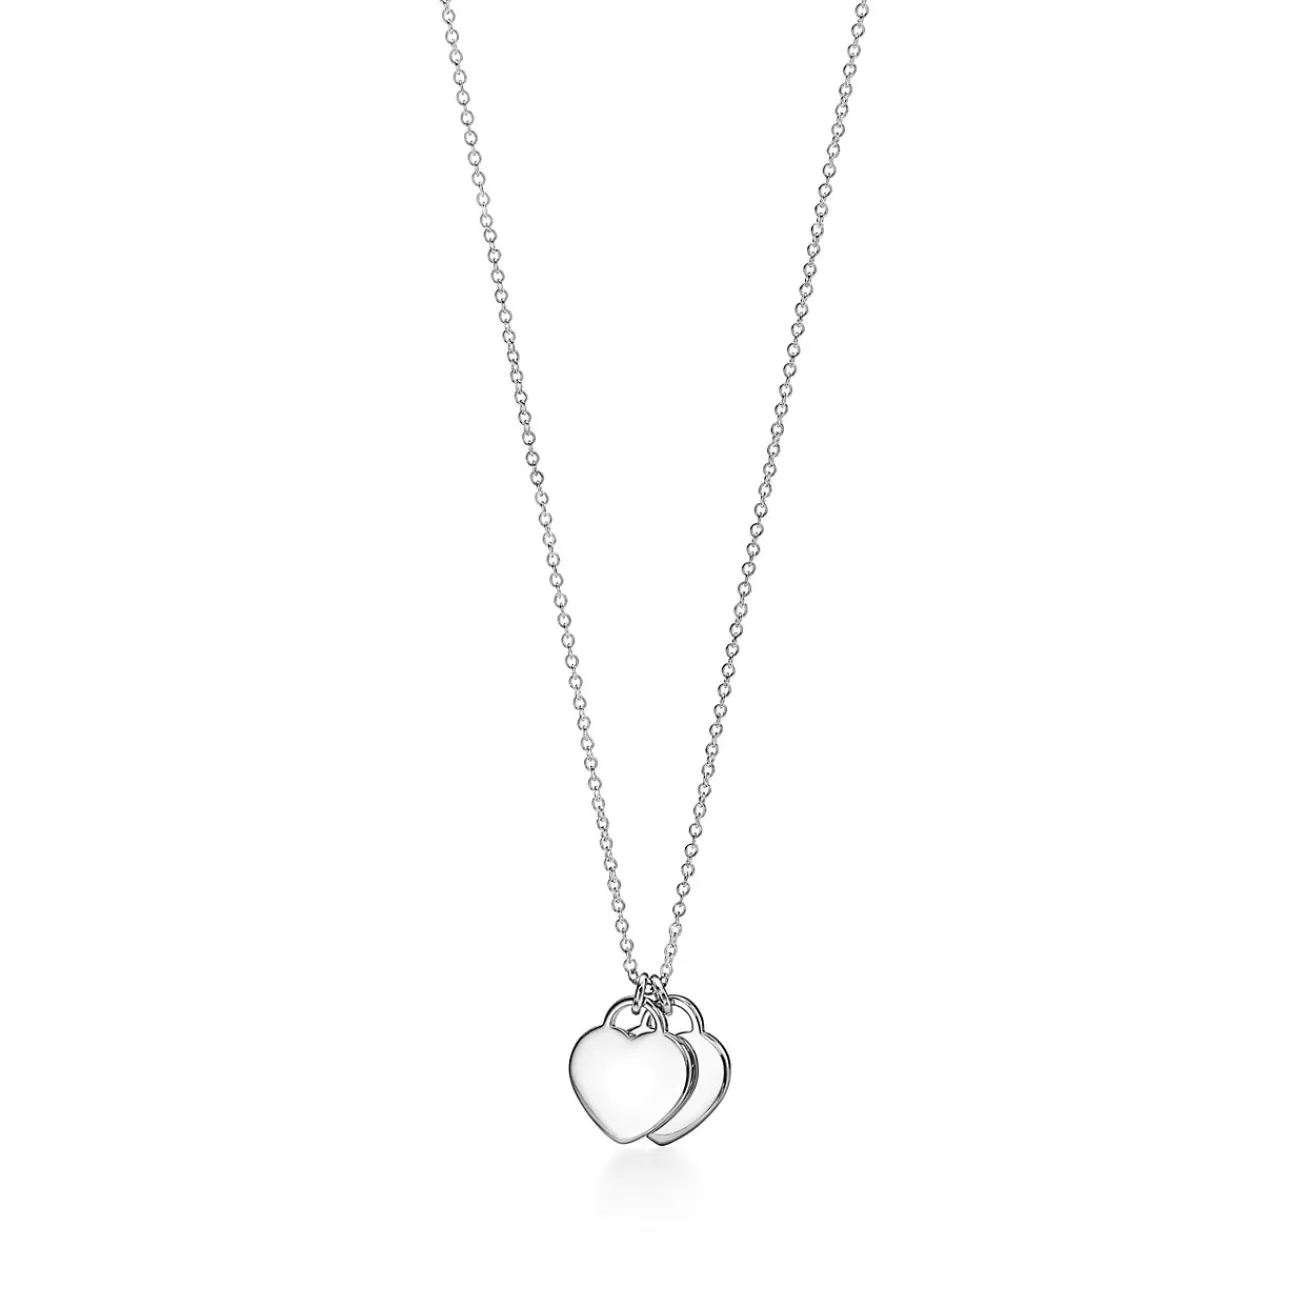 Tiffany & Co. Return to Tiffany® Heart Pendant in Silver, Tiffany Blue® with a Diamond, Mini | ^ Necklaces & Pendants | Gifts for Her